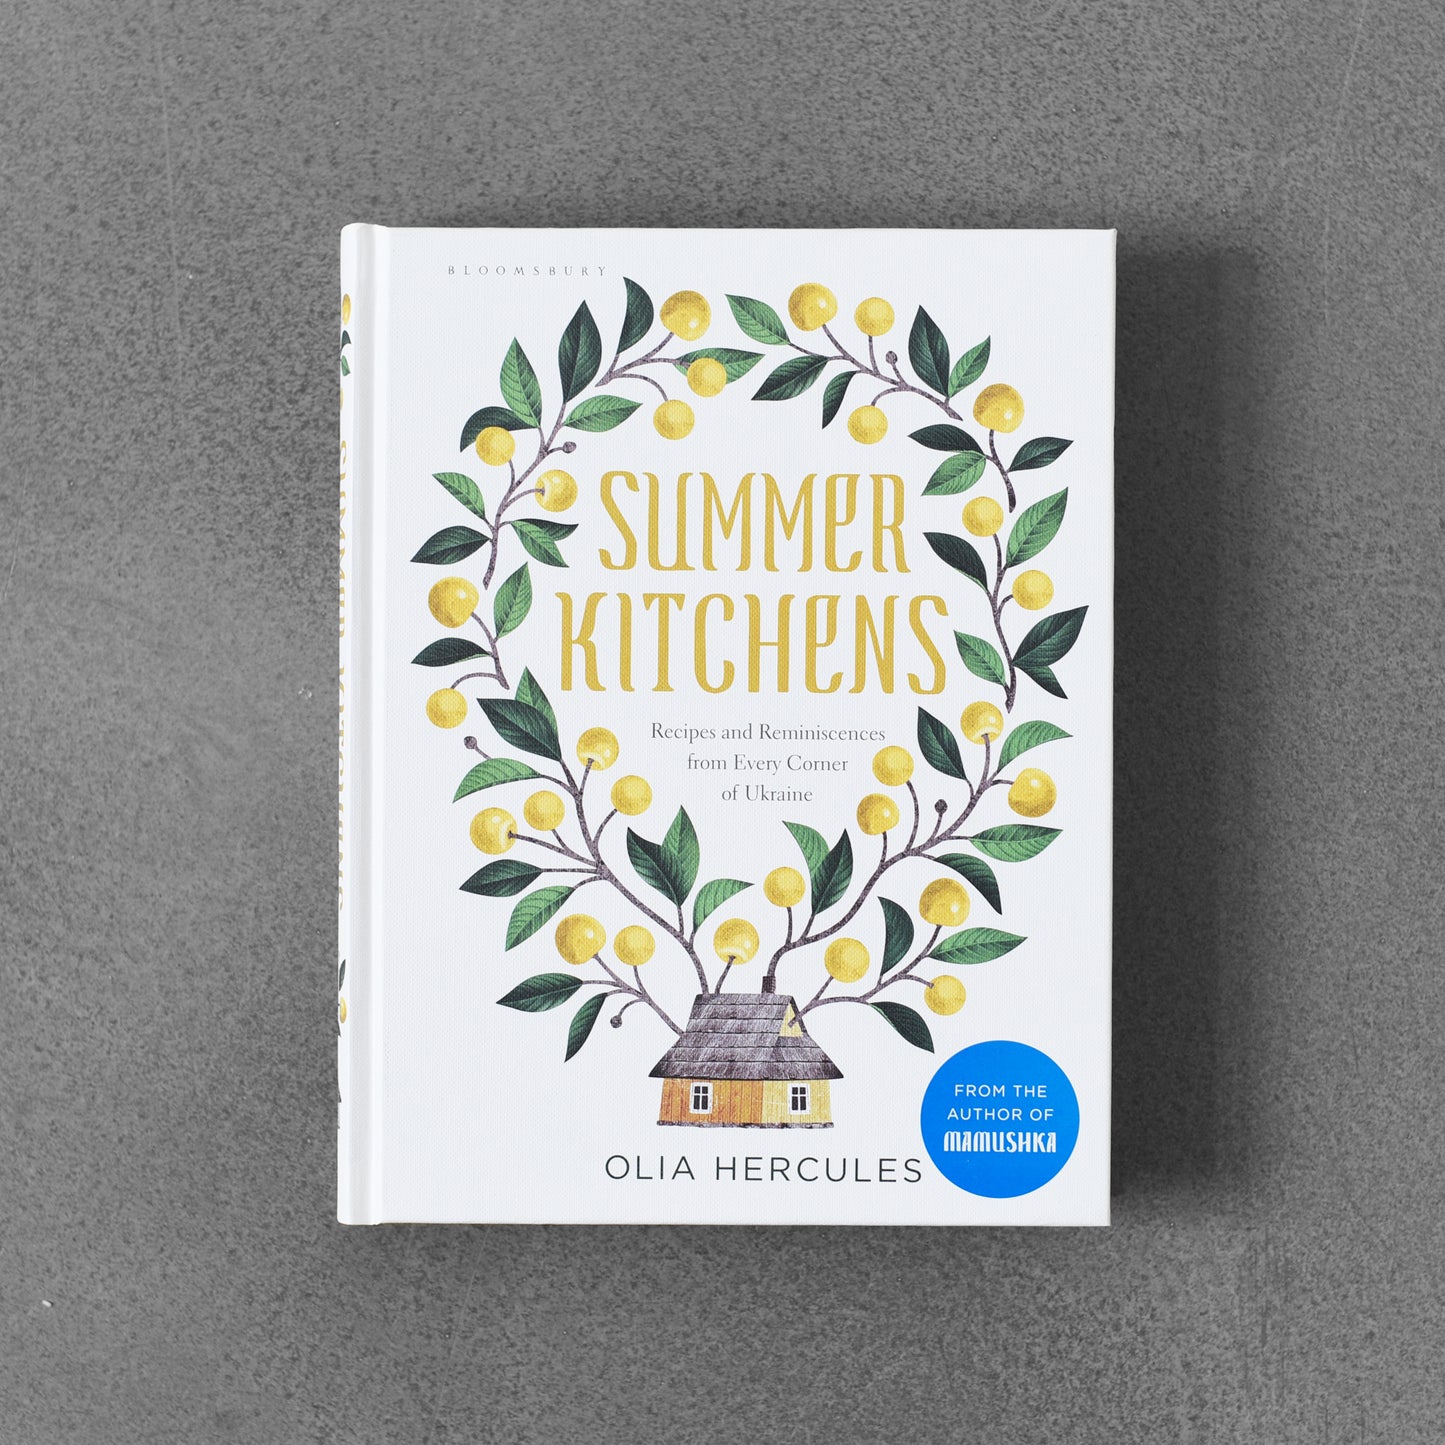 Summer Kitchens: Recipes and Reminiscences from Every Corner of Ukraine - Olia Hercules